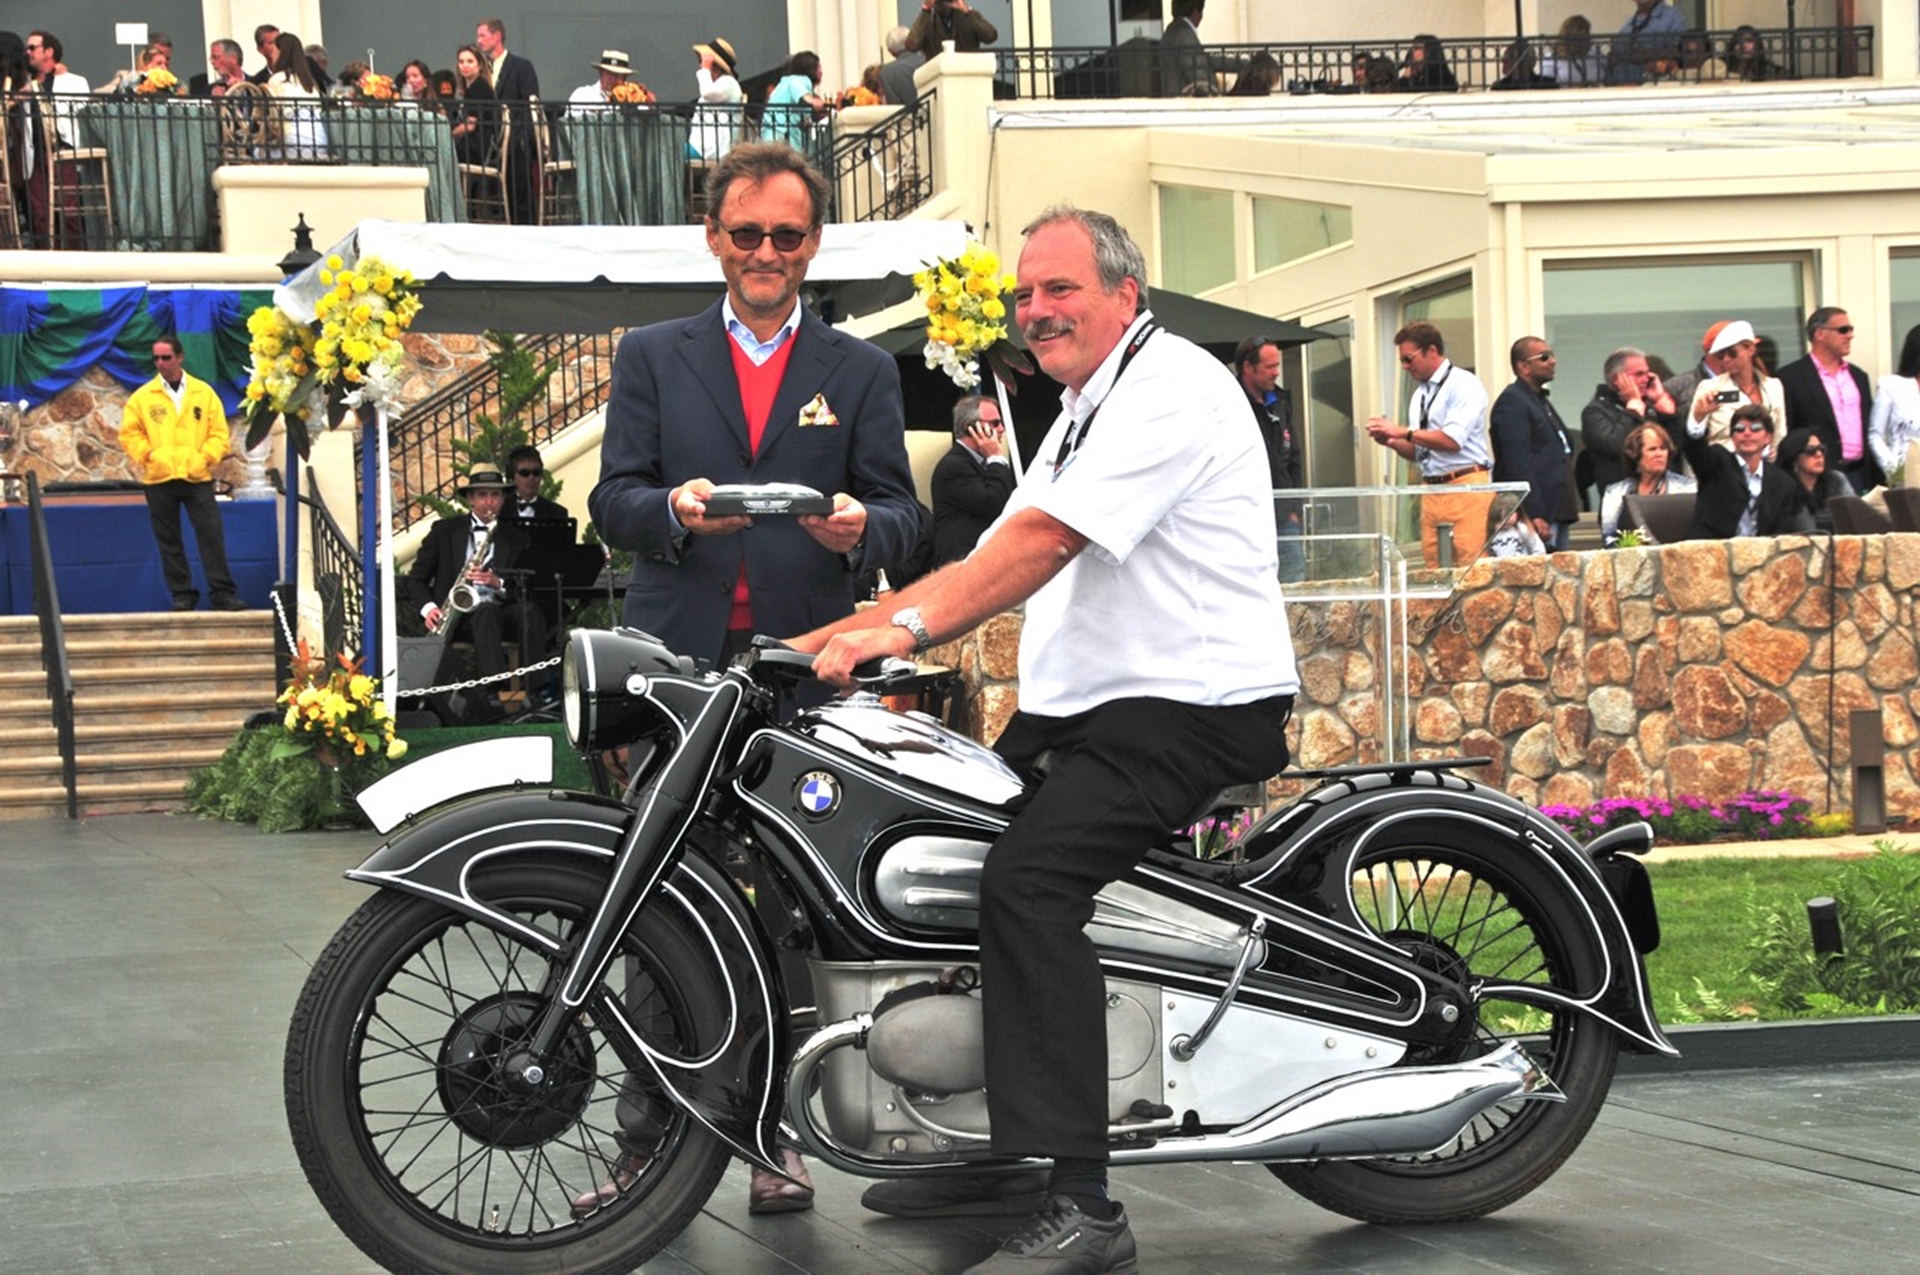 BMW R7 Motorcycle Wins Best-in-Class at Pebble Beach Concours